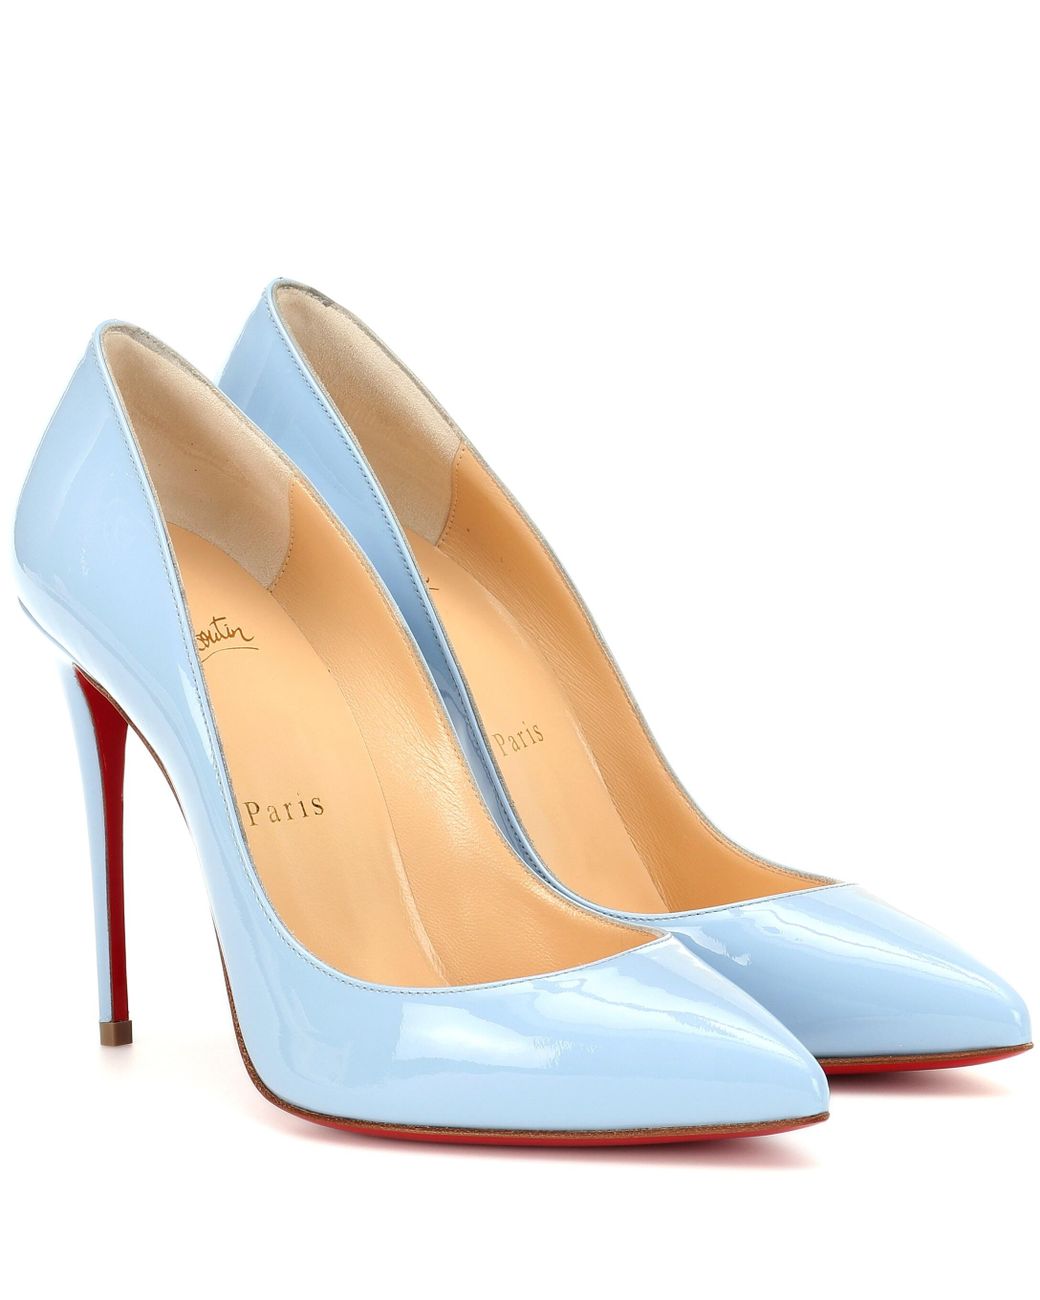 Christian Louboutin Pigalle Follies Patent Leather Pumps in Blue | Lyst